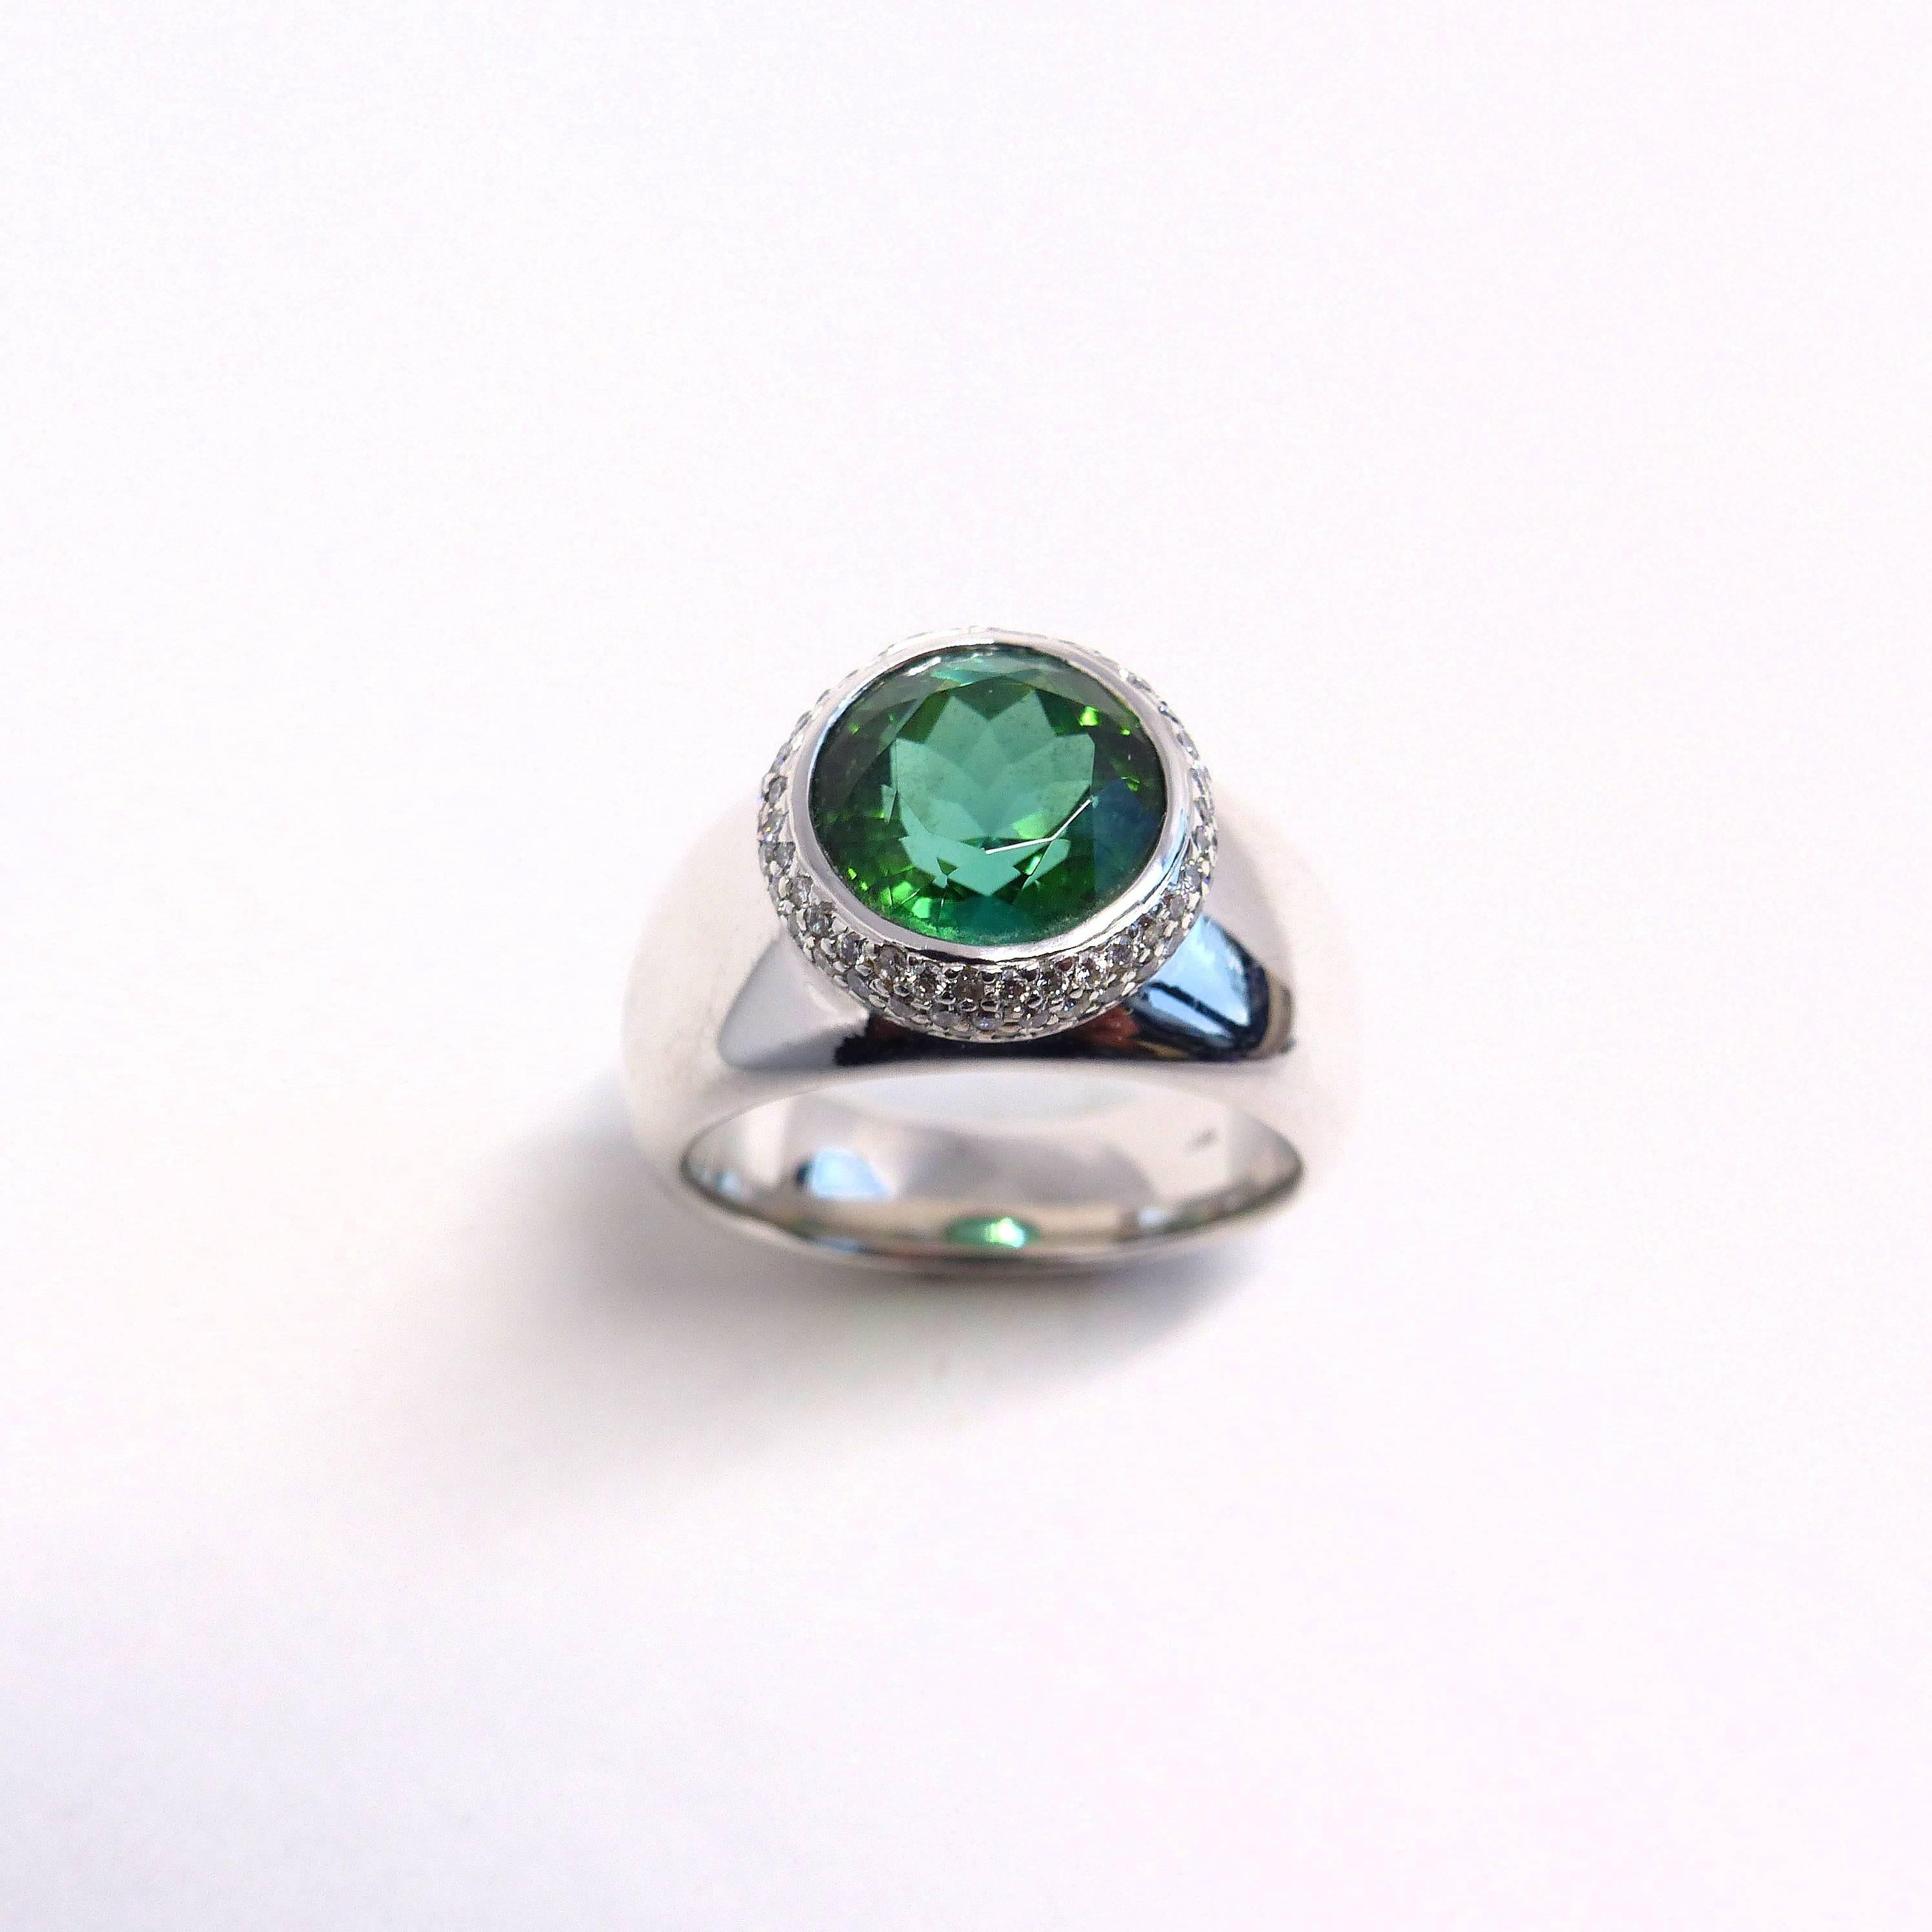 Thomas Leyser is renowned for his contemporary jewellery designs utilizing fine gemstones. 

This 18k white gold (18.75g) ring is set with 1x fine green Tourmaline (facetted, round, 10mm, 4.11ct) + 99x Diamonds (brillant-cut, 1mm, G/VS, 0.54ct).